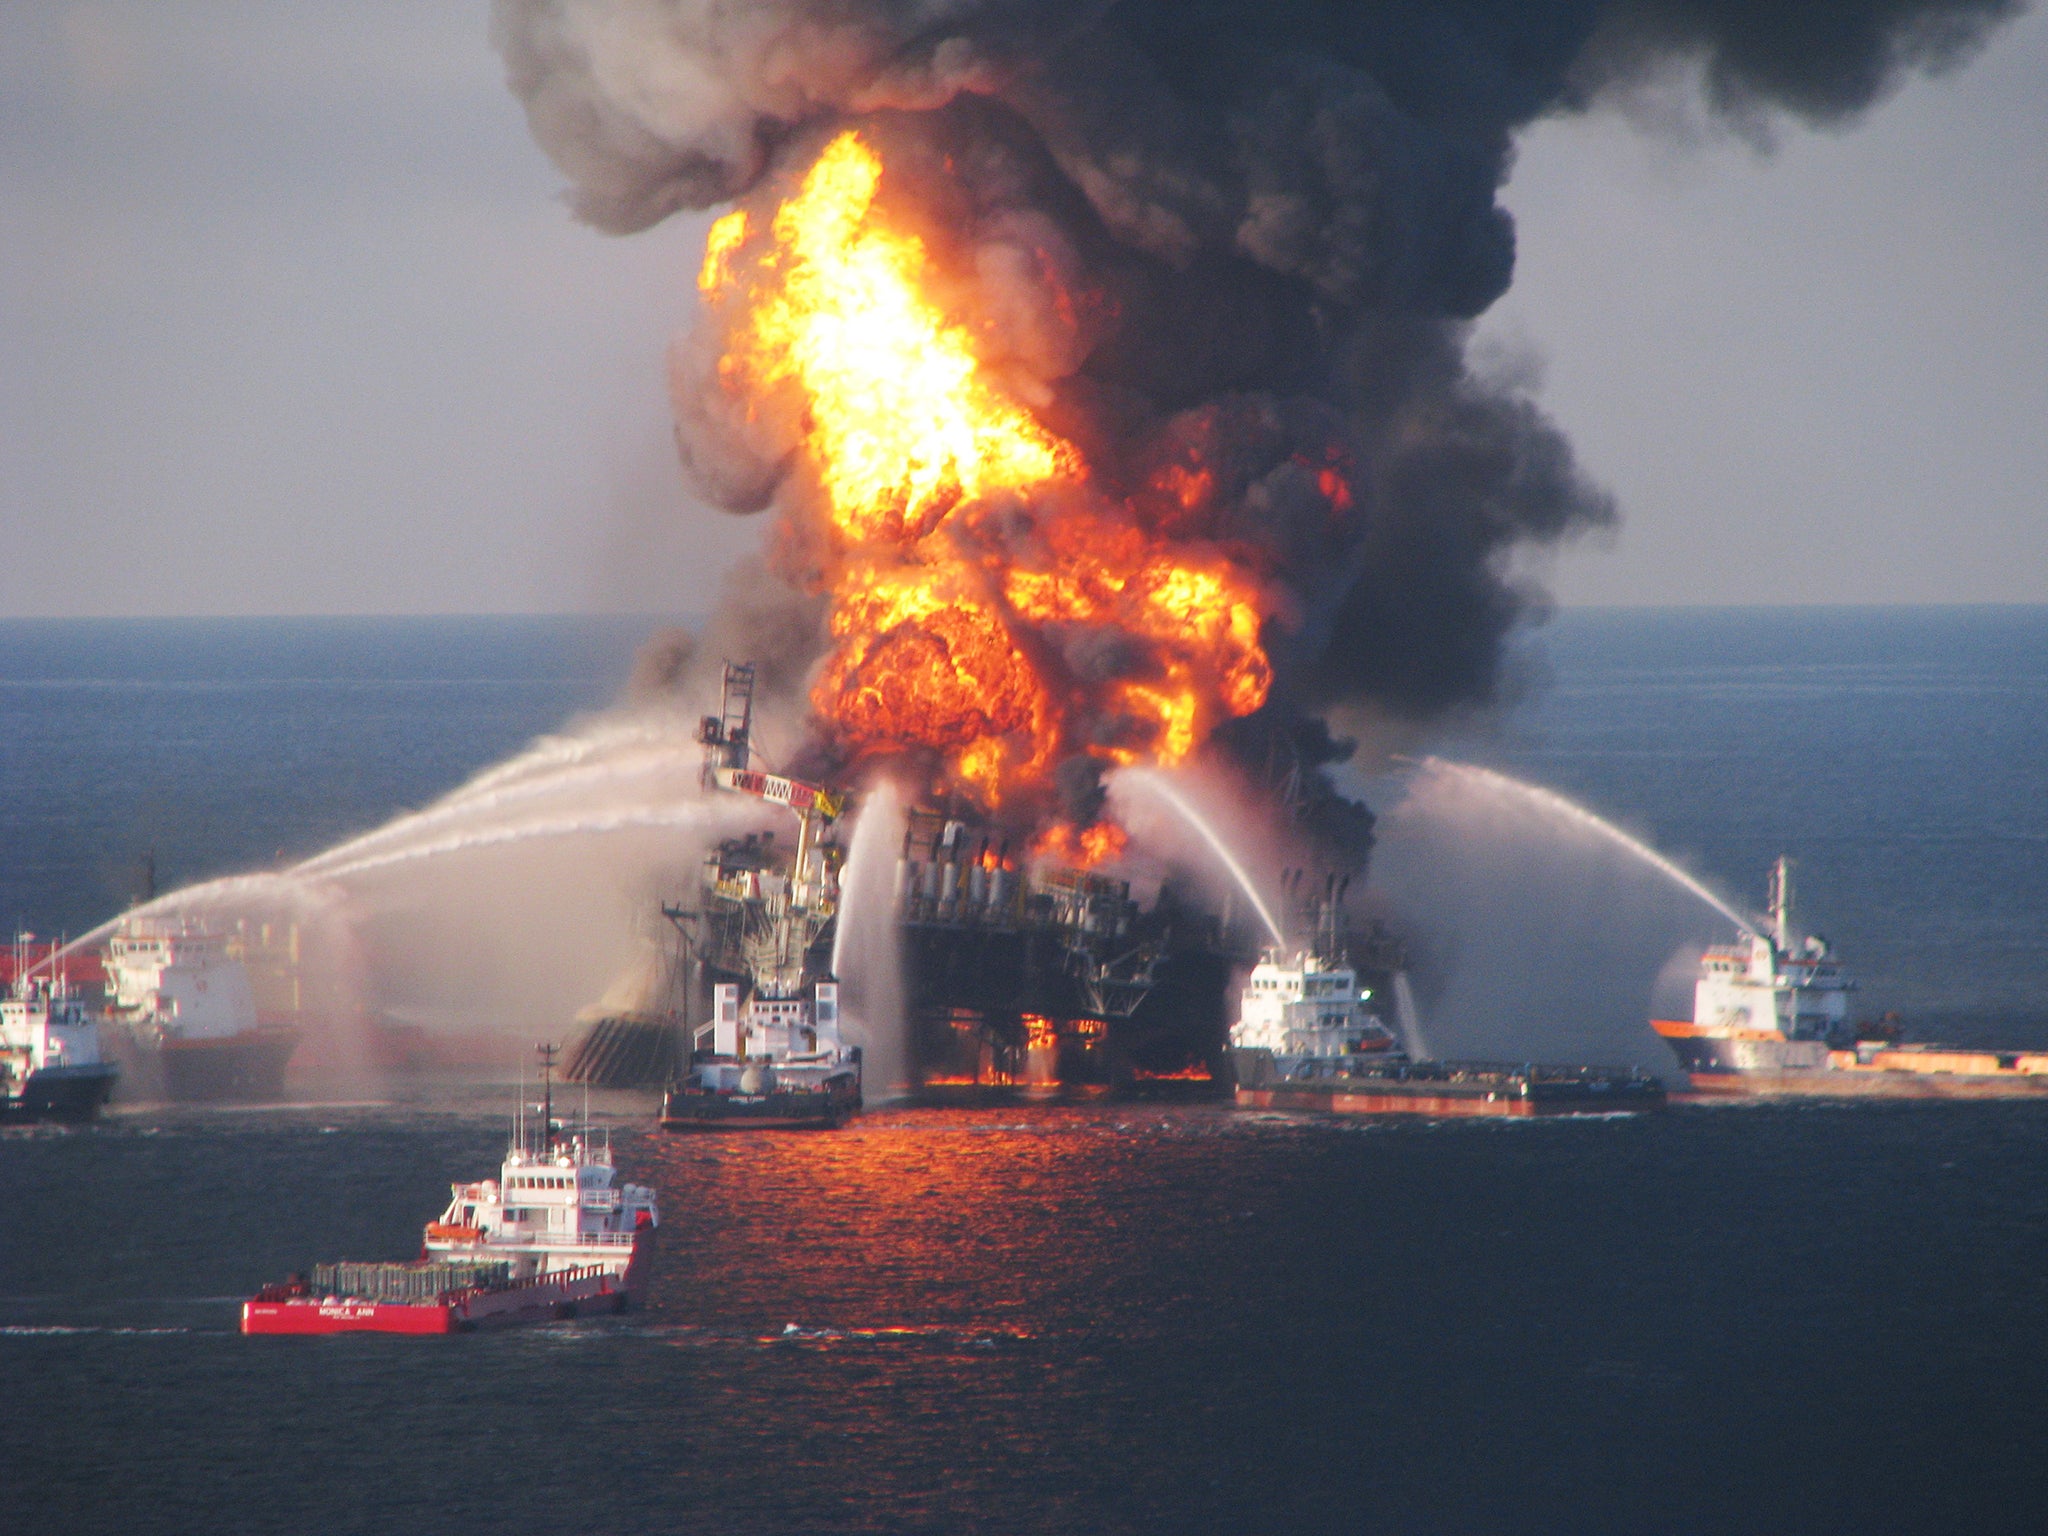 Fire boat response crews battle the blazing remnants of the BP Deepwater Horizon oil rig, which exploded in the Gulf of Mexico in 2010